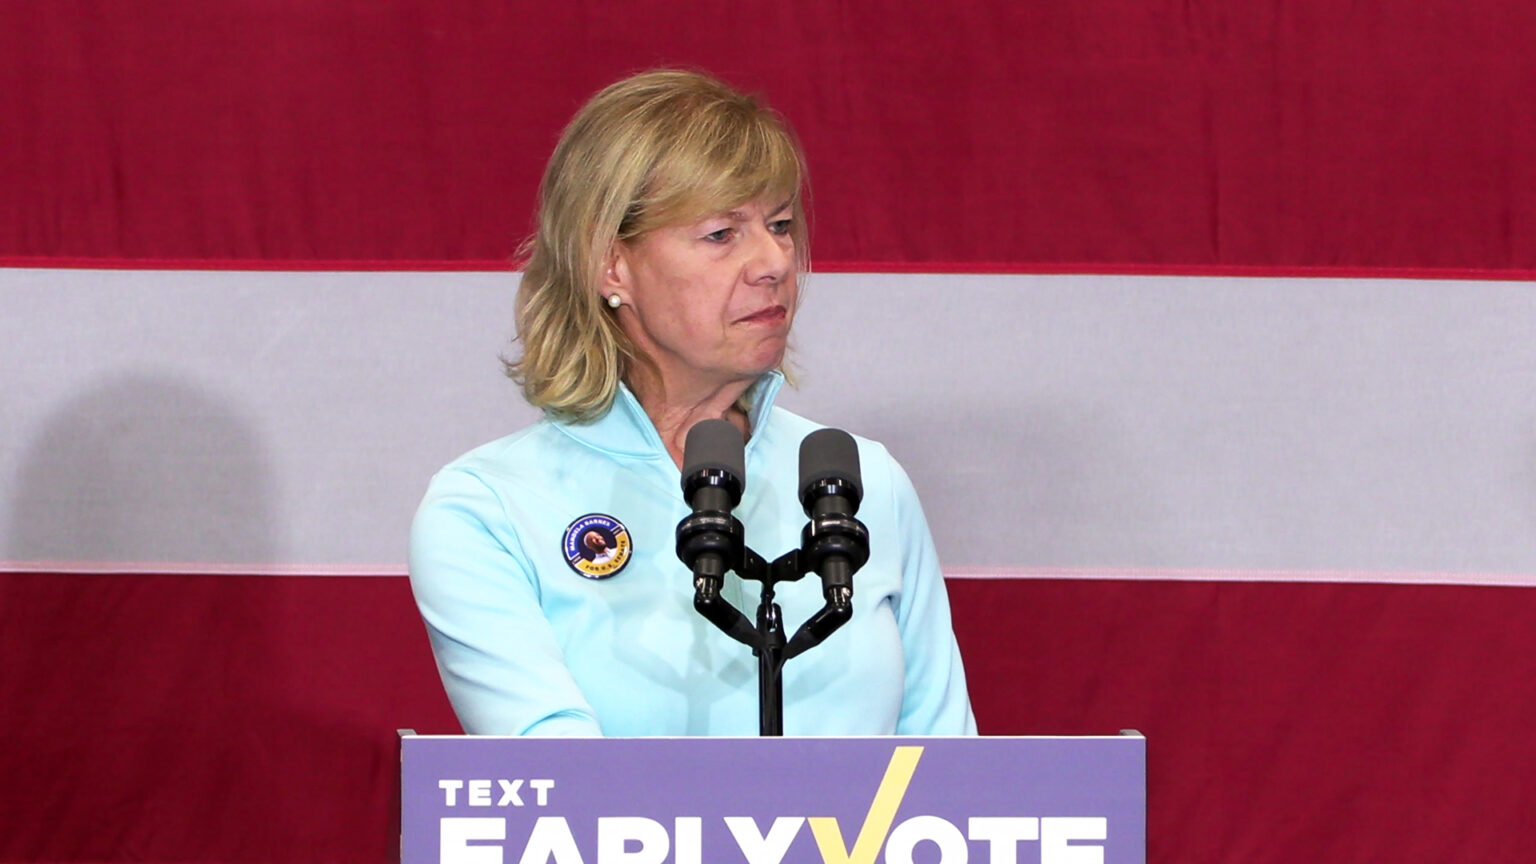 Tammy Baldwin speaks into microphones behind a podium, with the stripes of a large U.S. flag in the background.